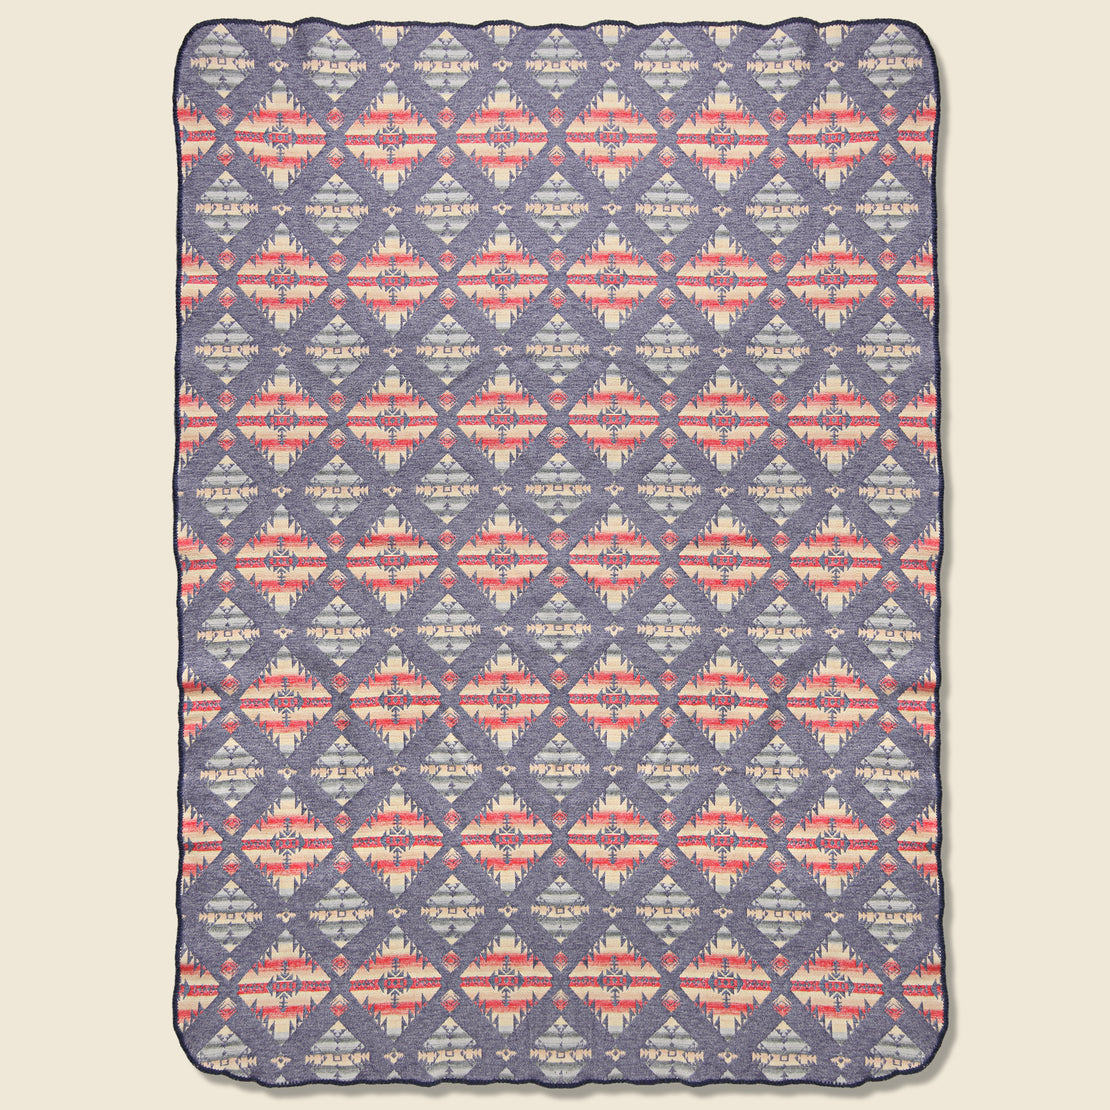 Aspen Sherpa Blanket - Beacon Print - Faherty - STAG Provisions - Gift - Blankets